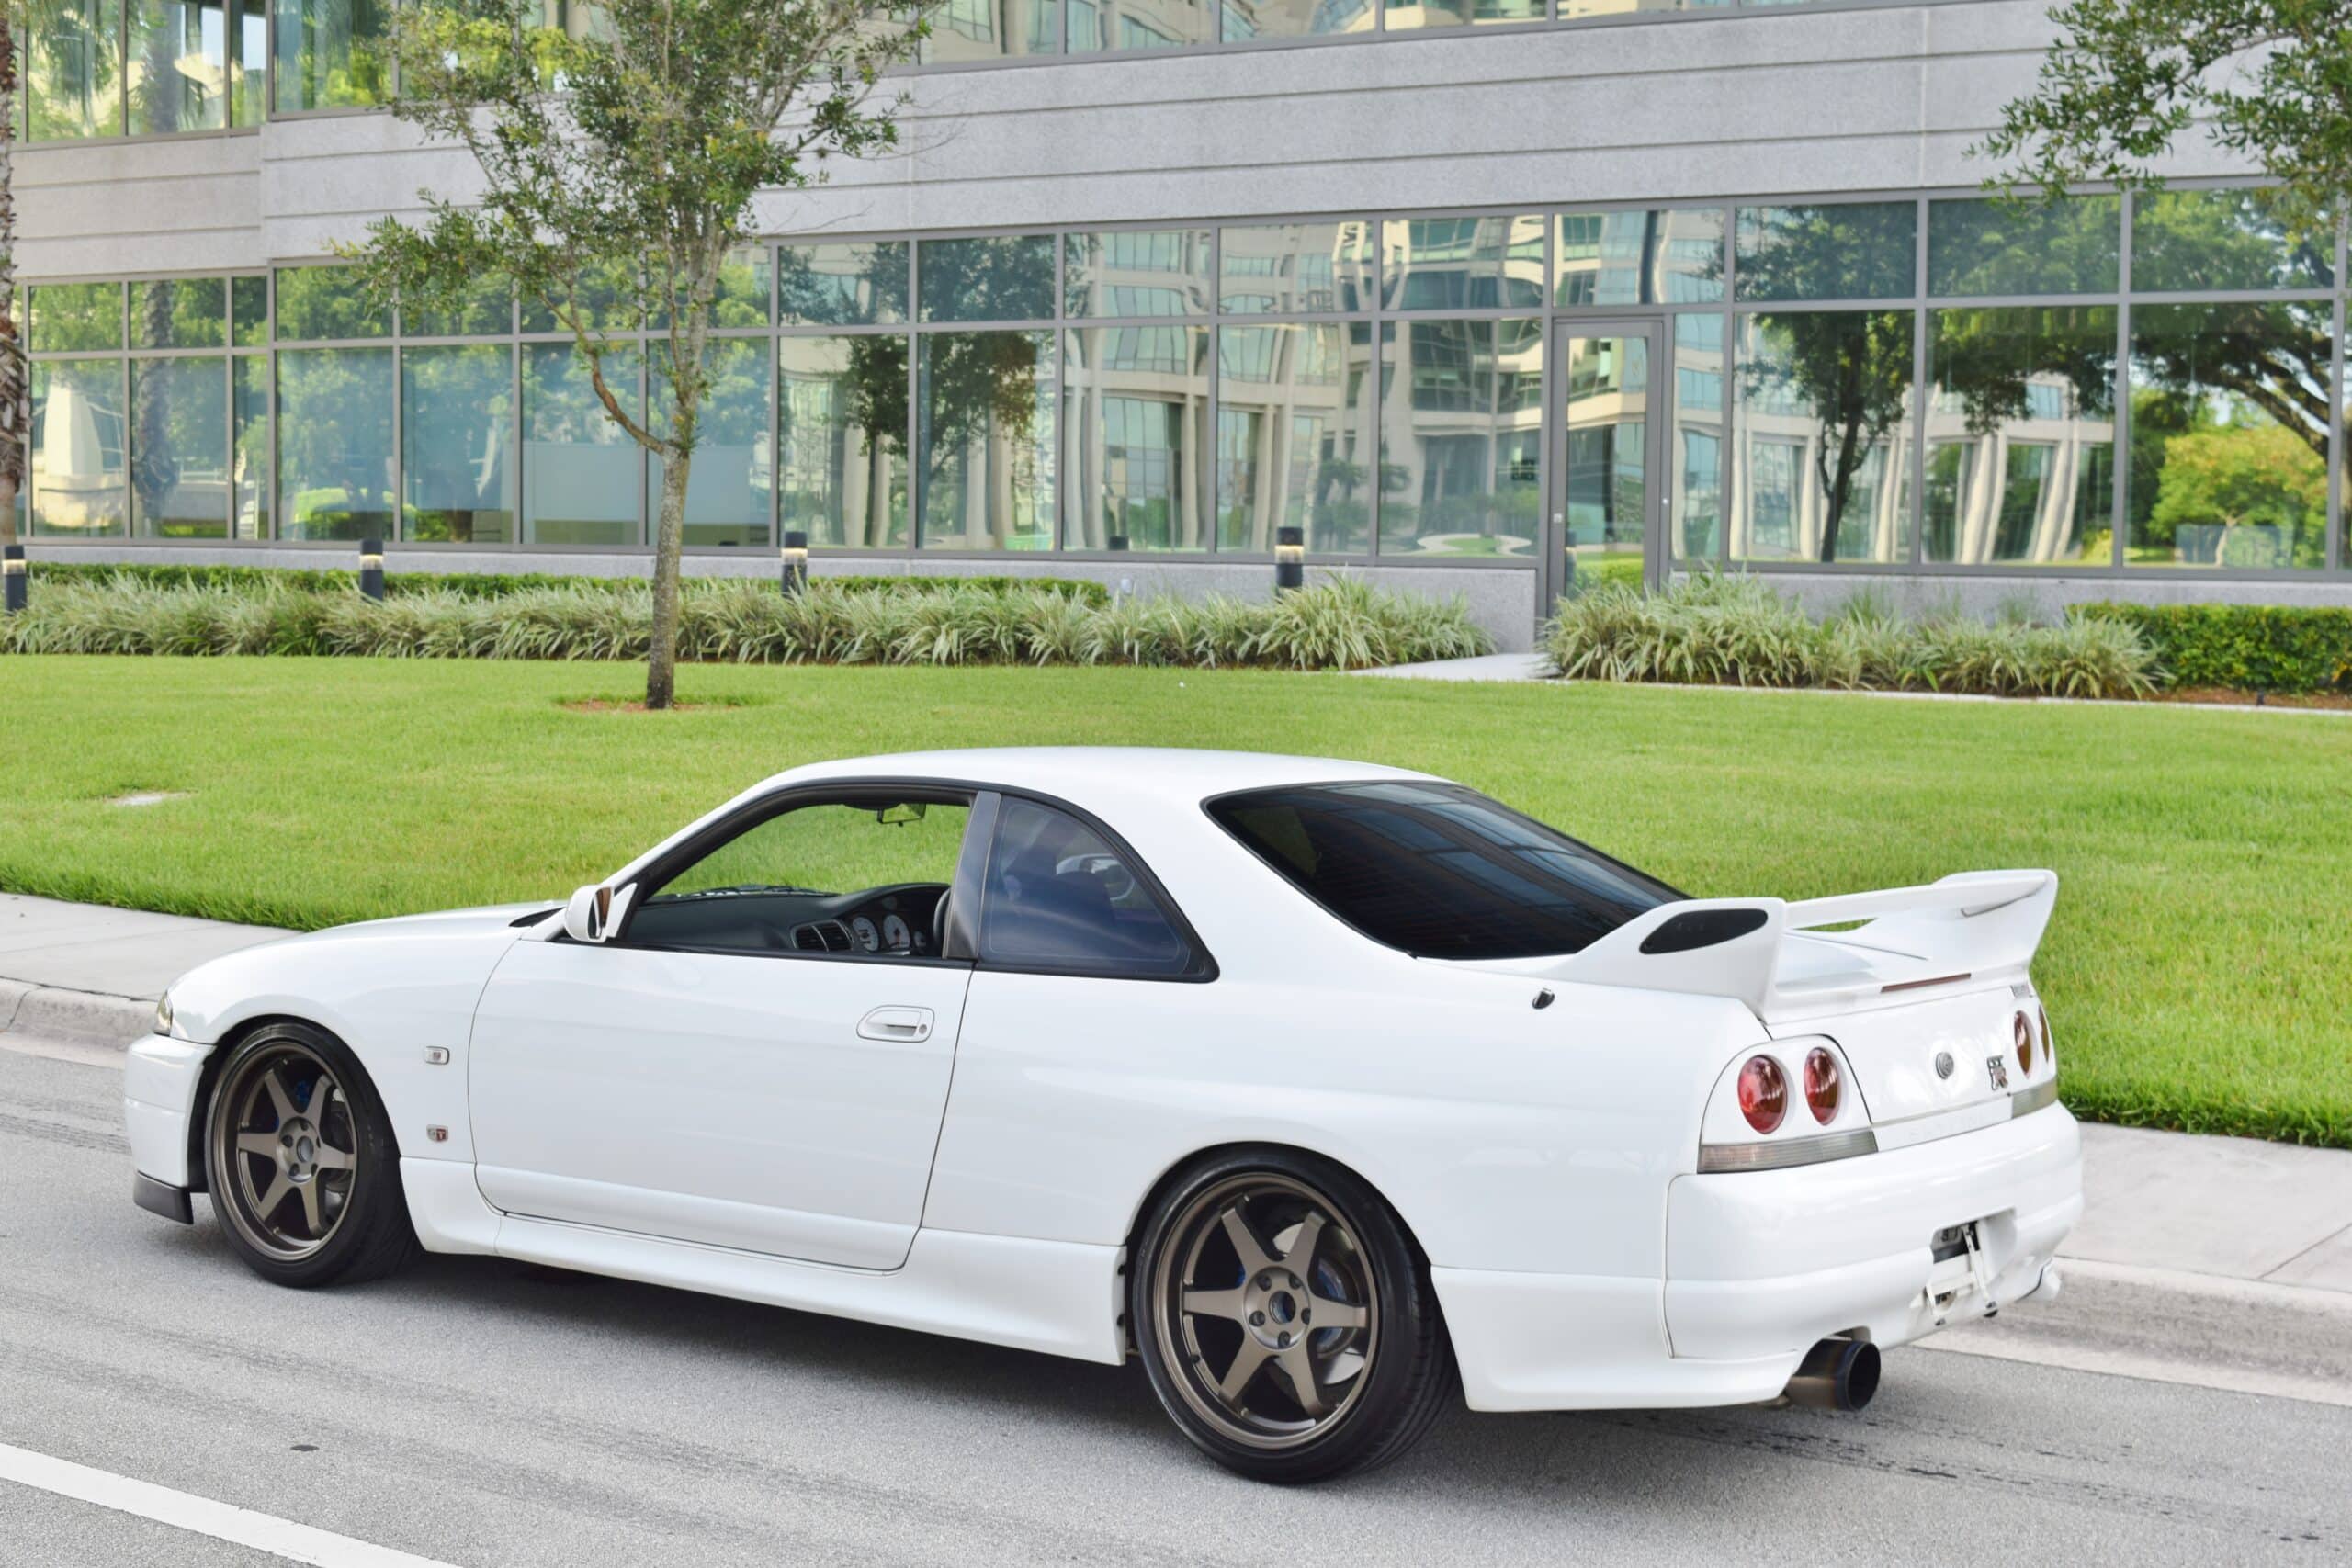 1995 Nissan GT-R R33 Skyline Only 66K Miles-Nicely Modified High Quality Parts -HKS Coilovers- Full Bolt On